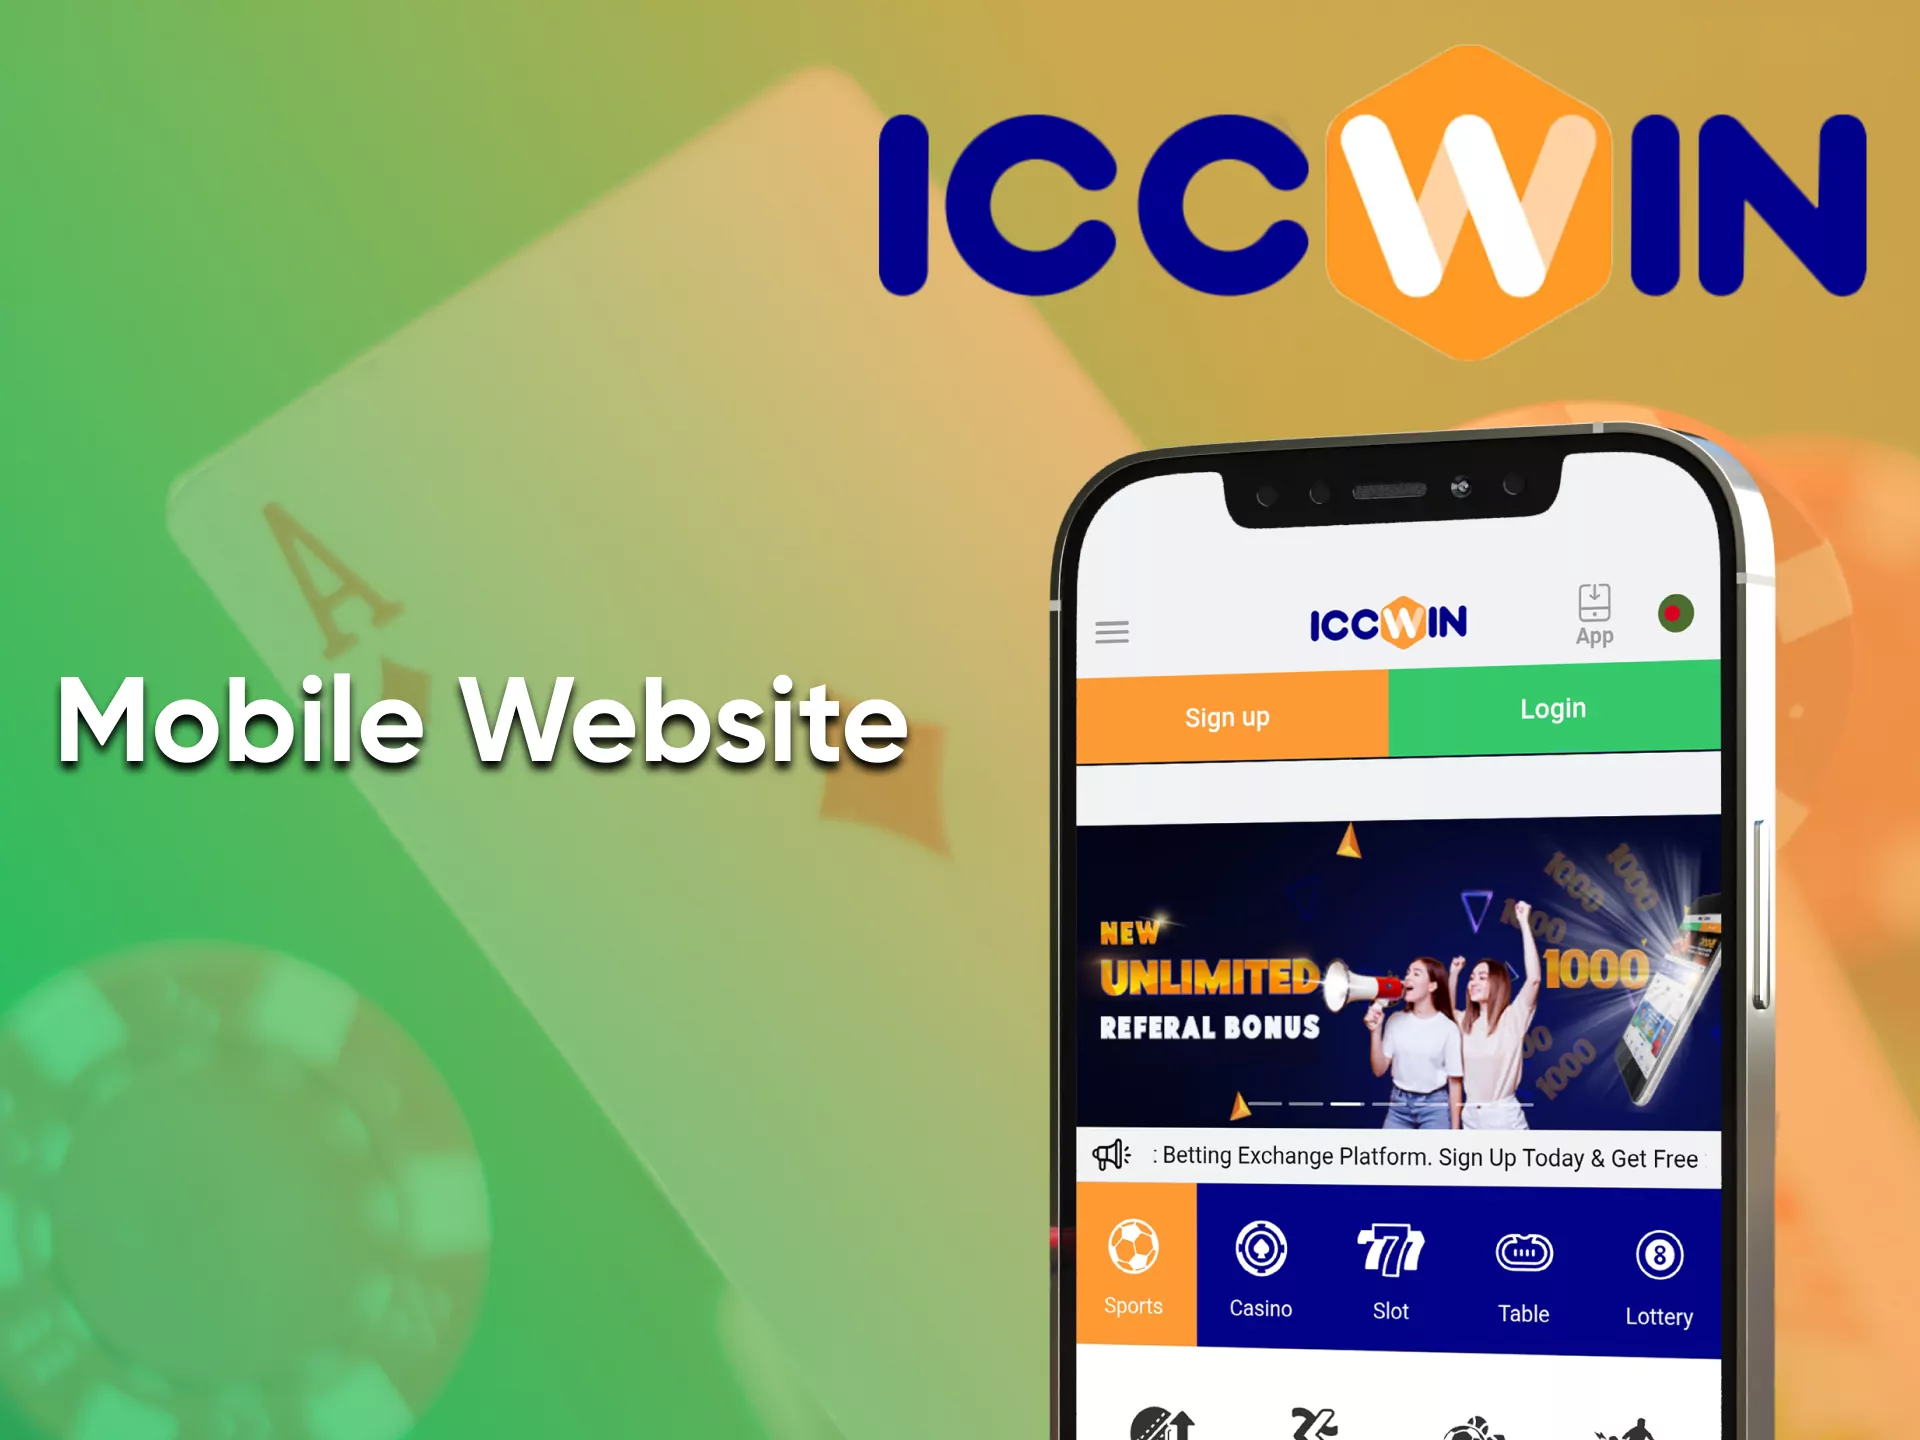 Visit the ICCWin website from your device.